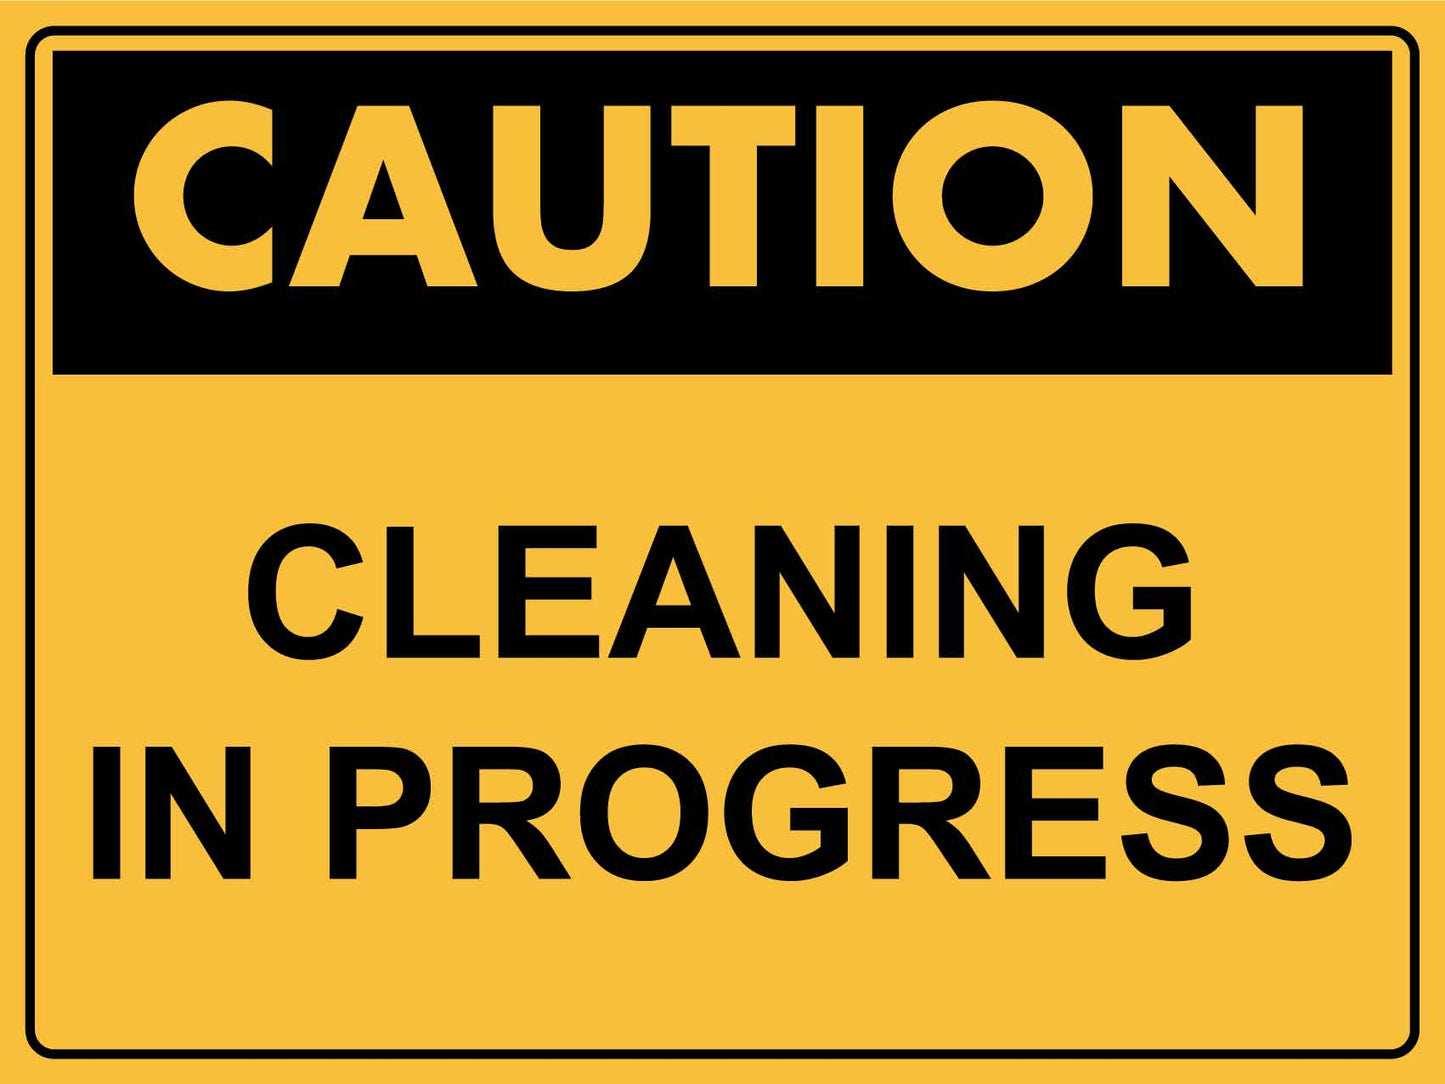 Caution Cleaning in Progress Sign